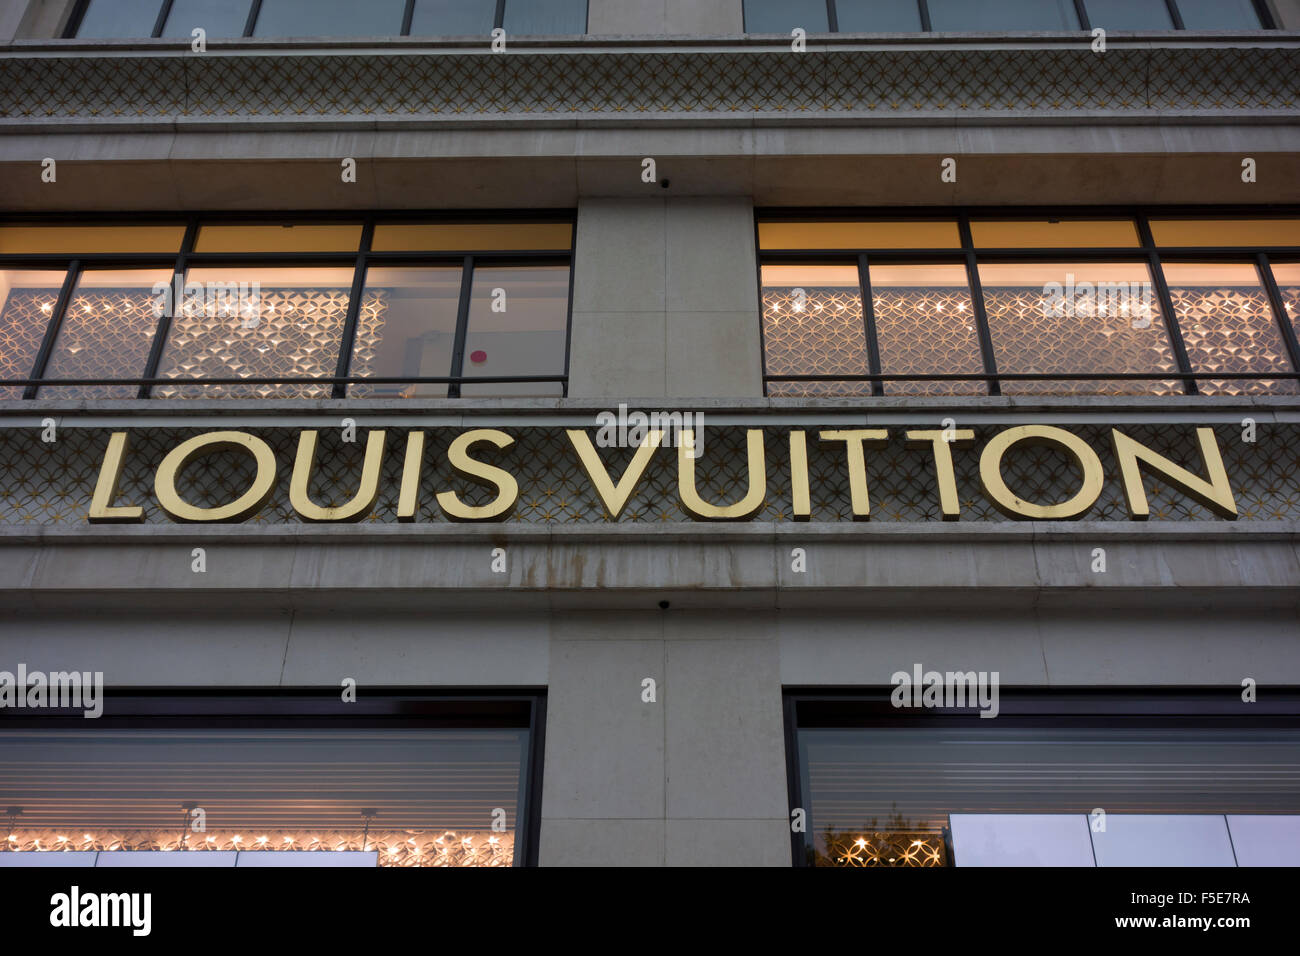 General view of the Louis Vuitton's Champs Elysees store, on January  News Photo - Getty Images